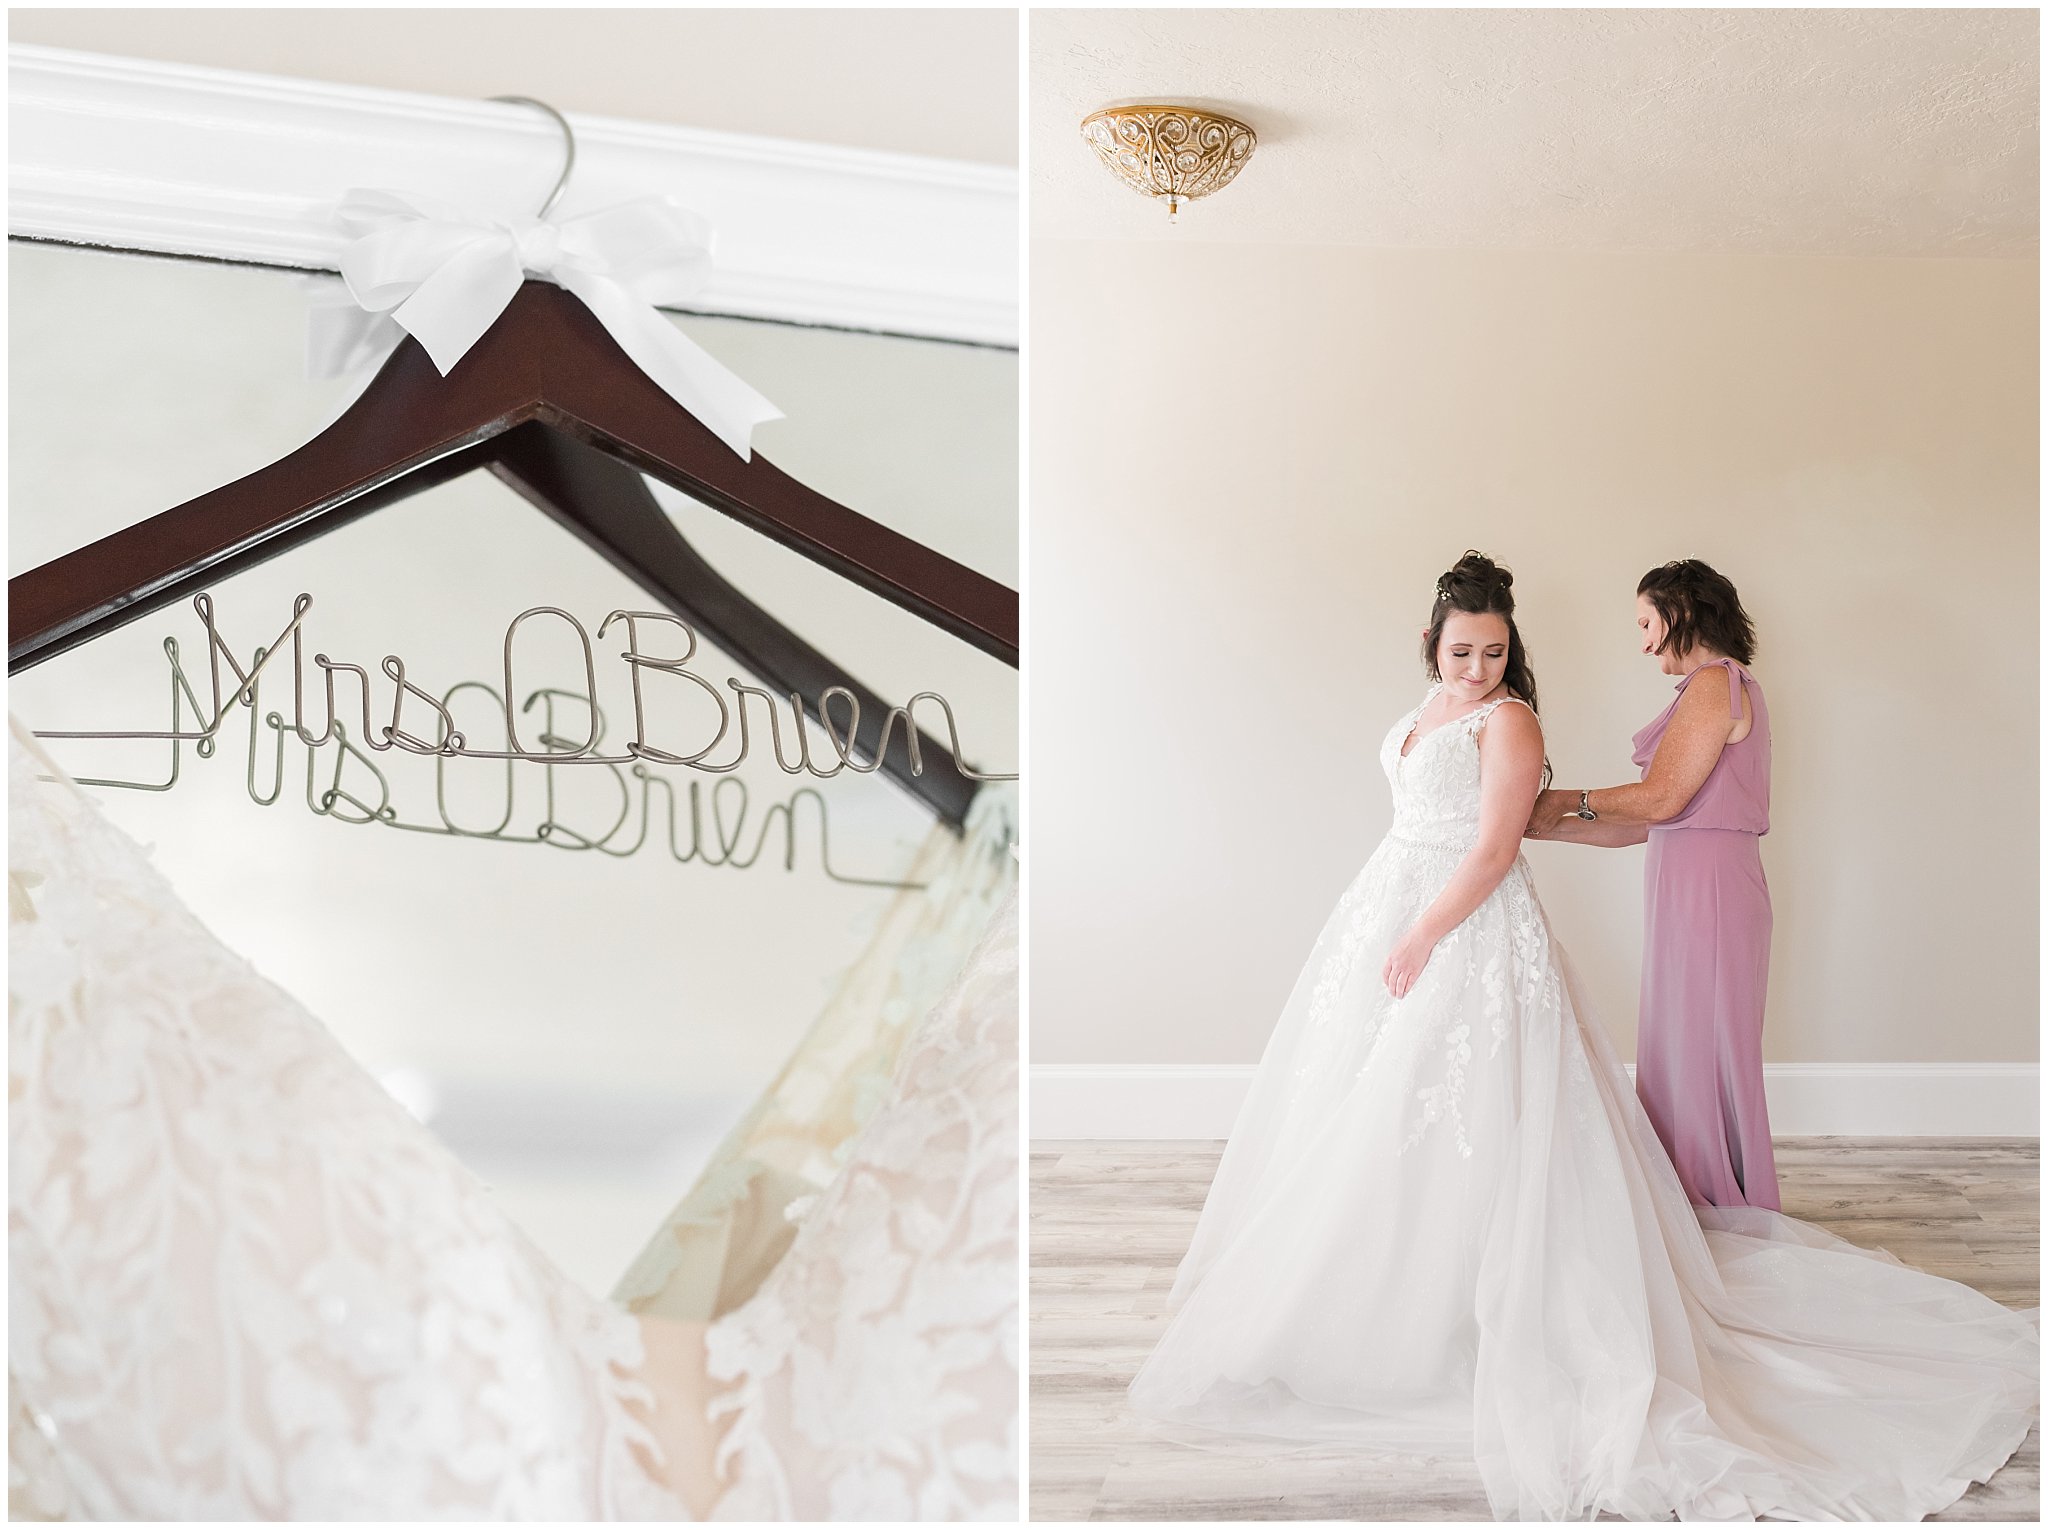 Mom doing up the back of bride's dress | Oak Hills Utah Dusty Rose and Gray Summer Wedding | Jessie and Dallin Photography